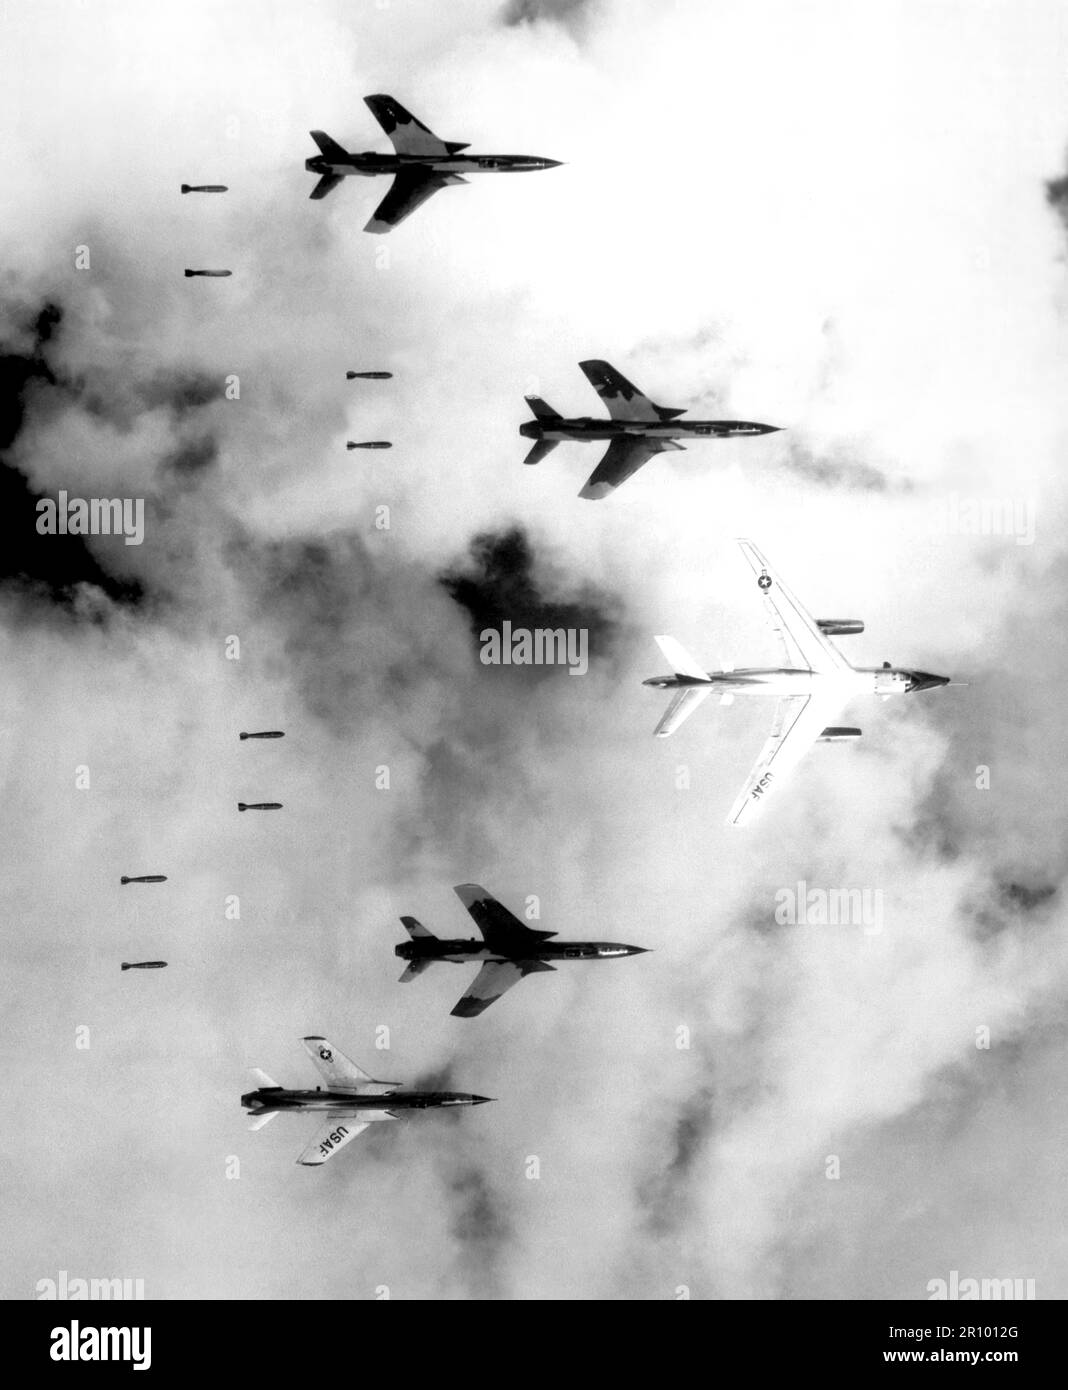 Flying under radar control with a B-66 Destroyer, Air Force F-105 Thunderchief pilots bomb a military target through low clouds over the southern panhandle of North Viet Nam.  June 14, 1966. Photograph by Lt. Col. Cecil J. Poss, USAF. Stock Photo